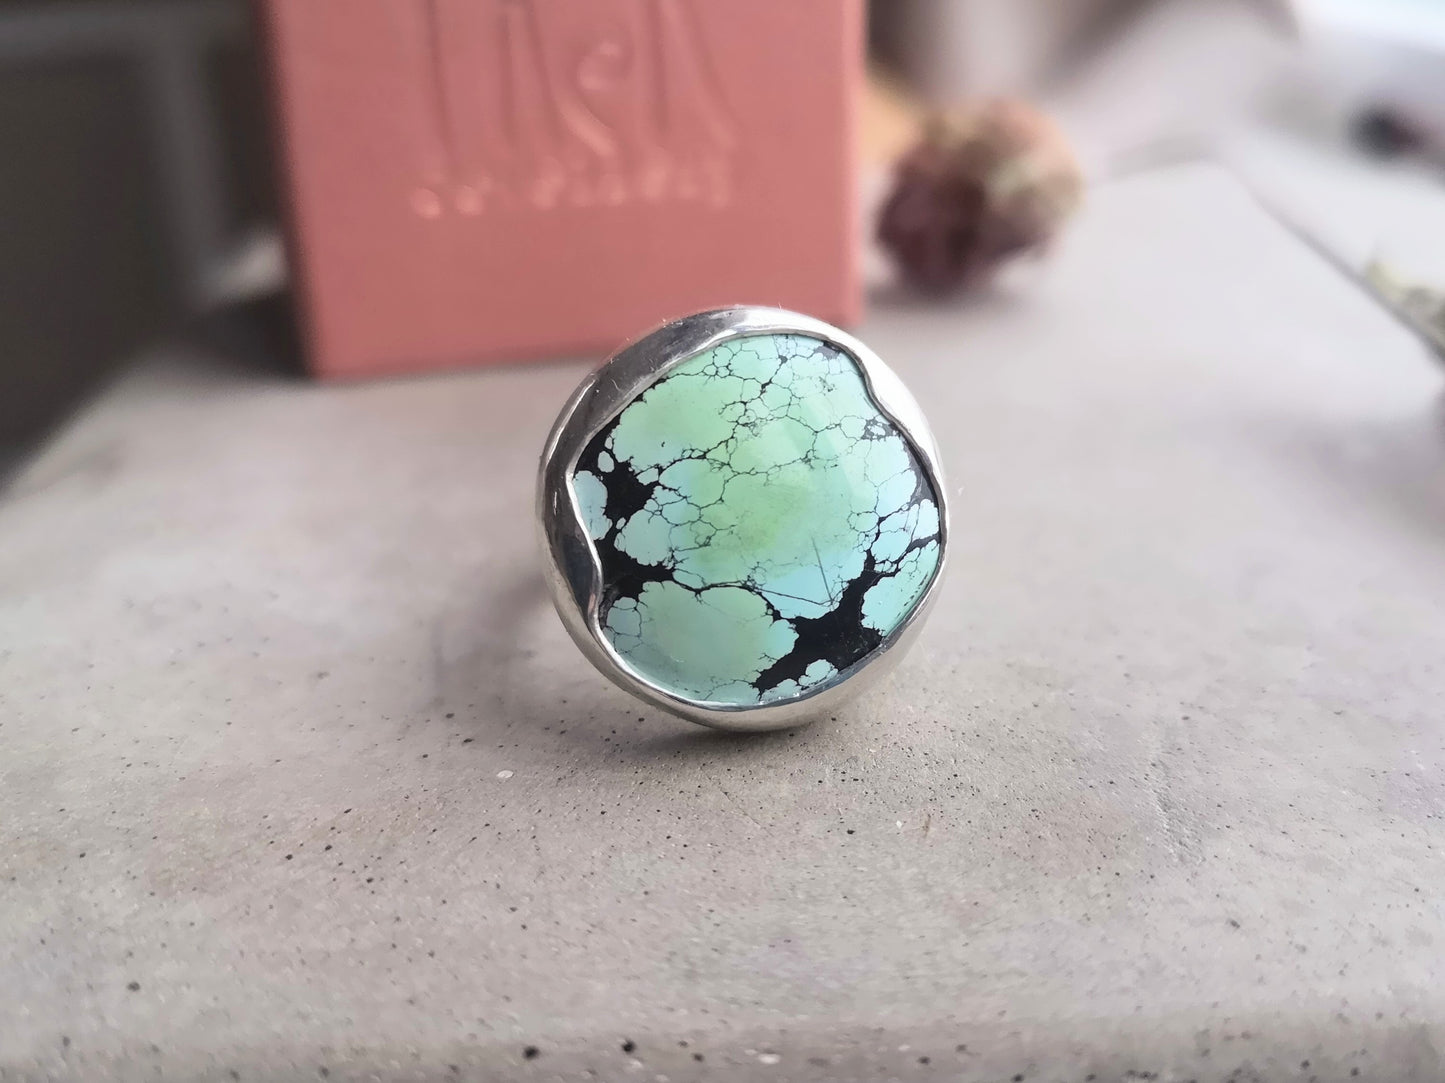 Minty blue-green 'Giraffe' Turquoise Statment Ring